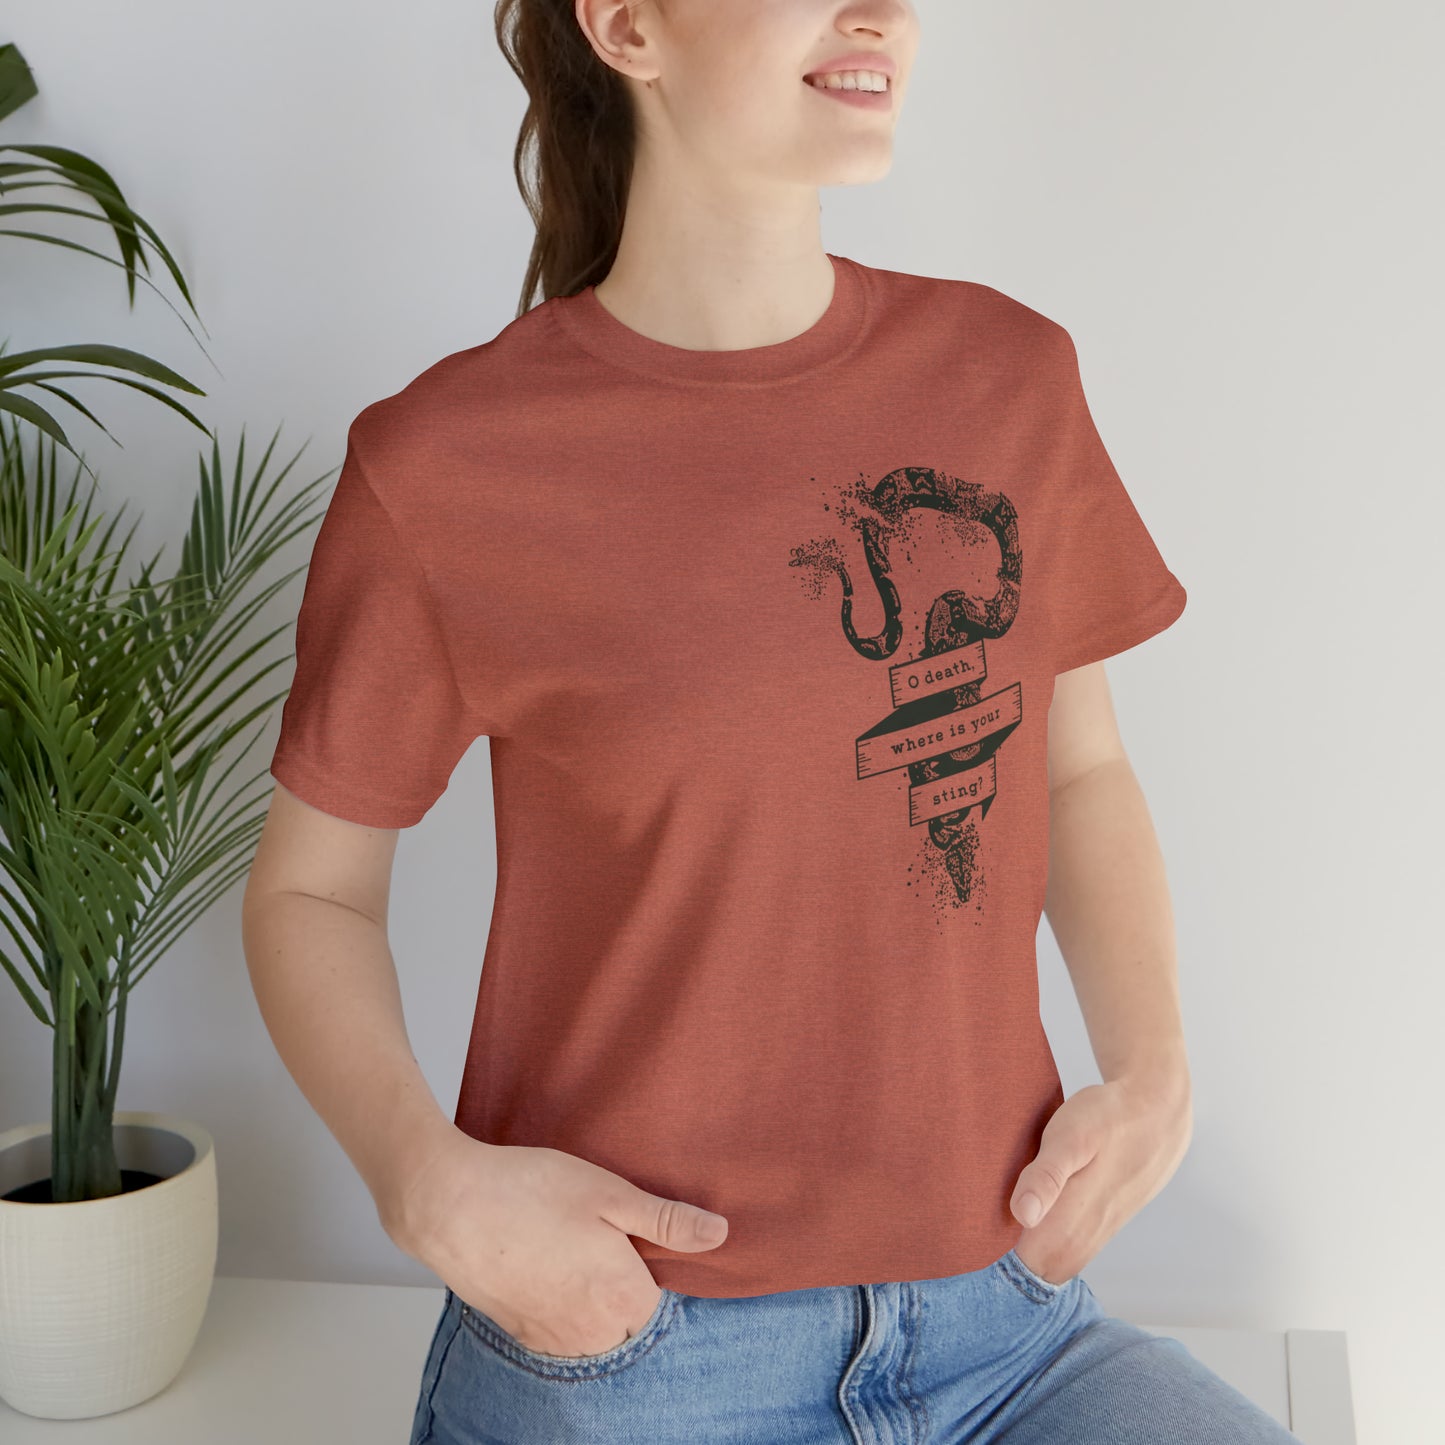 O death where is your sting? T-shirt